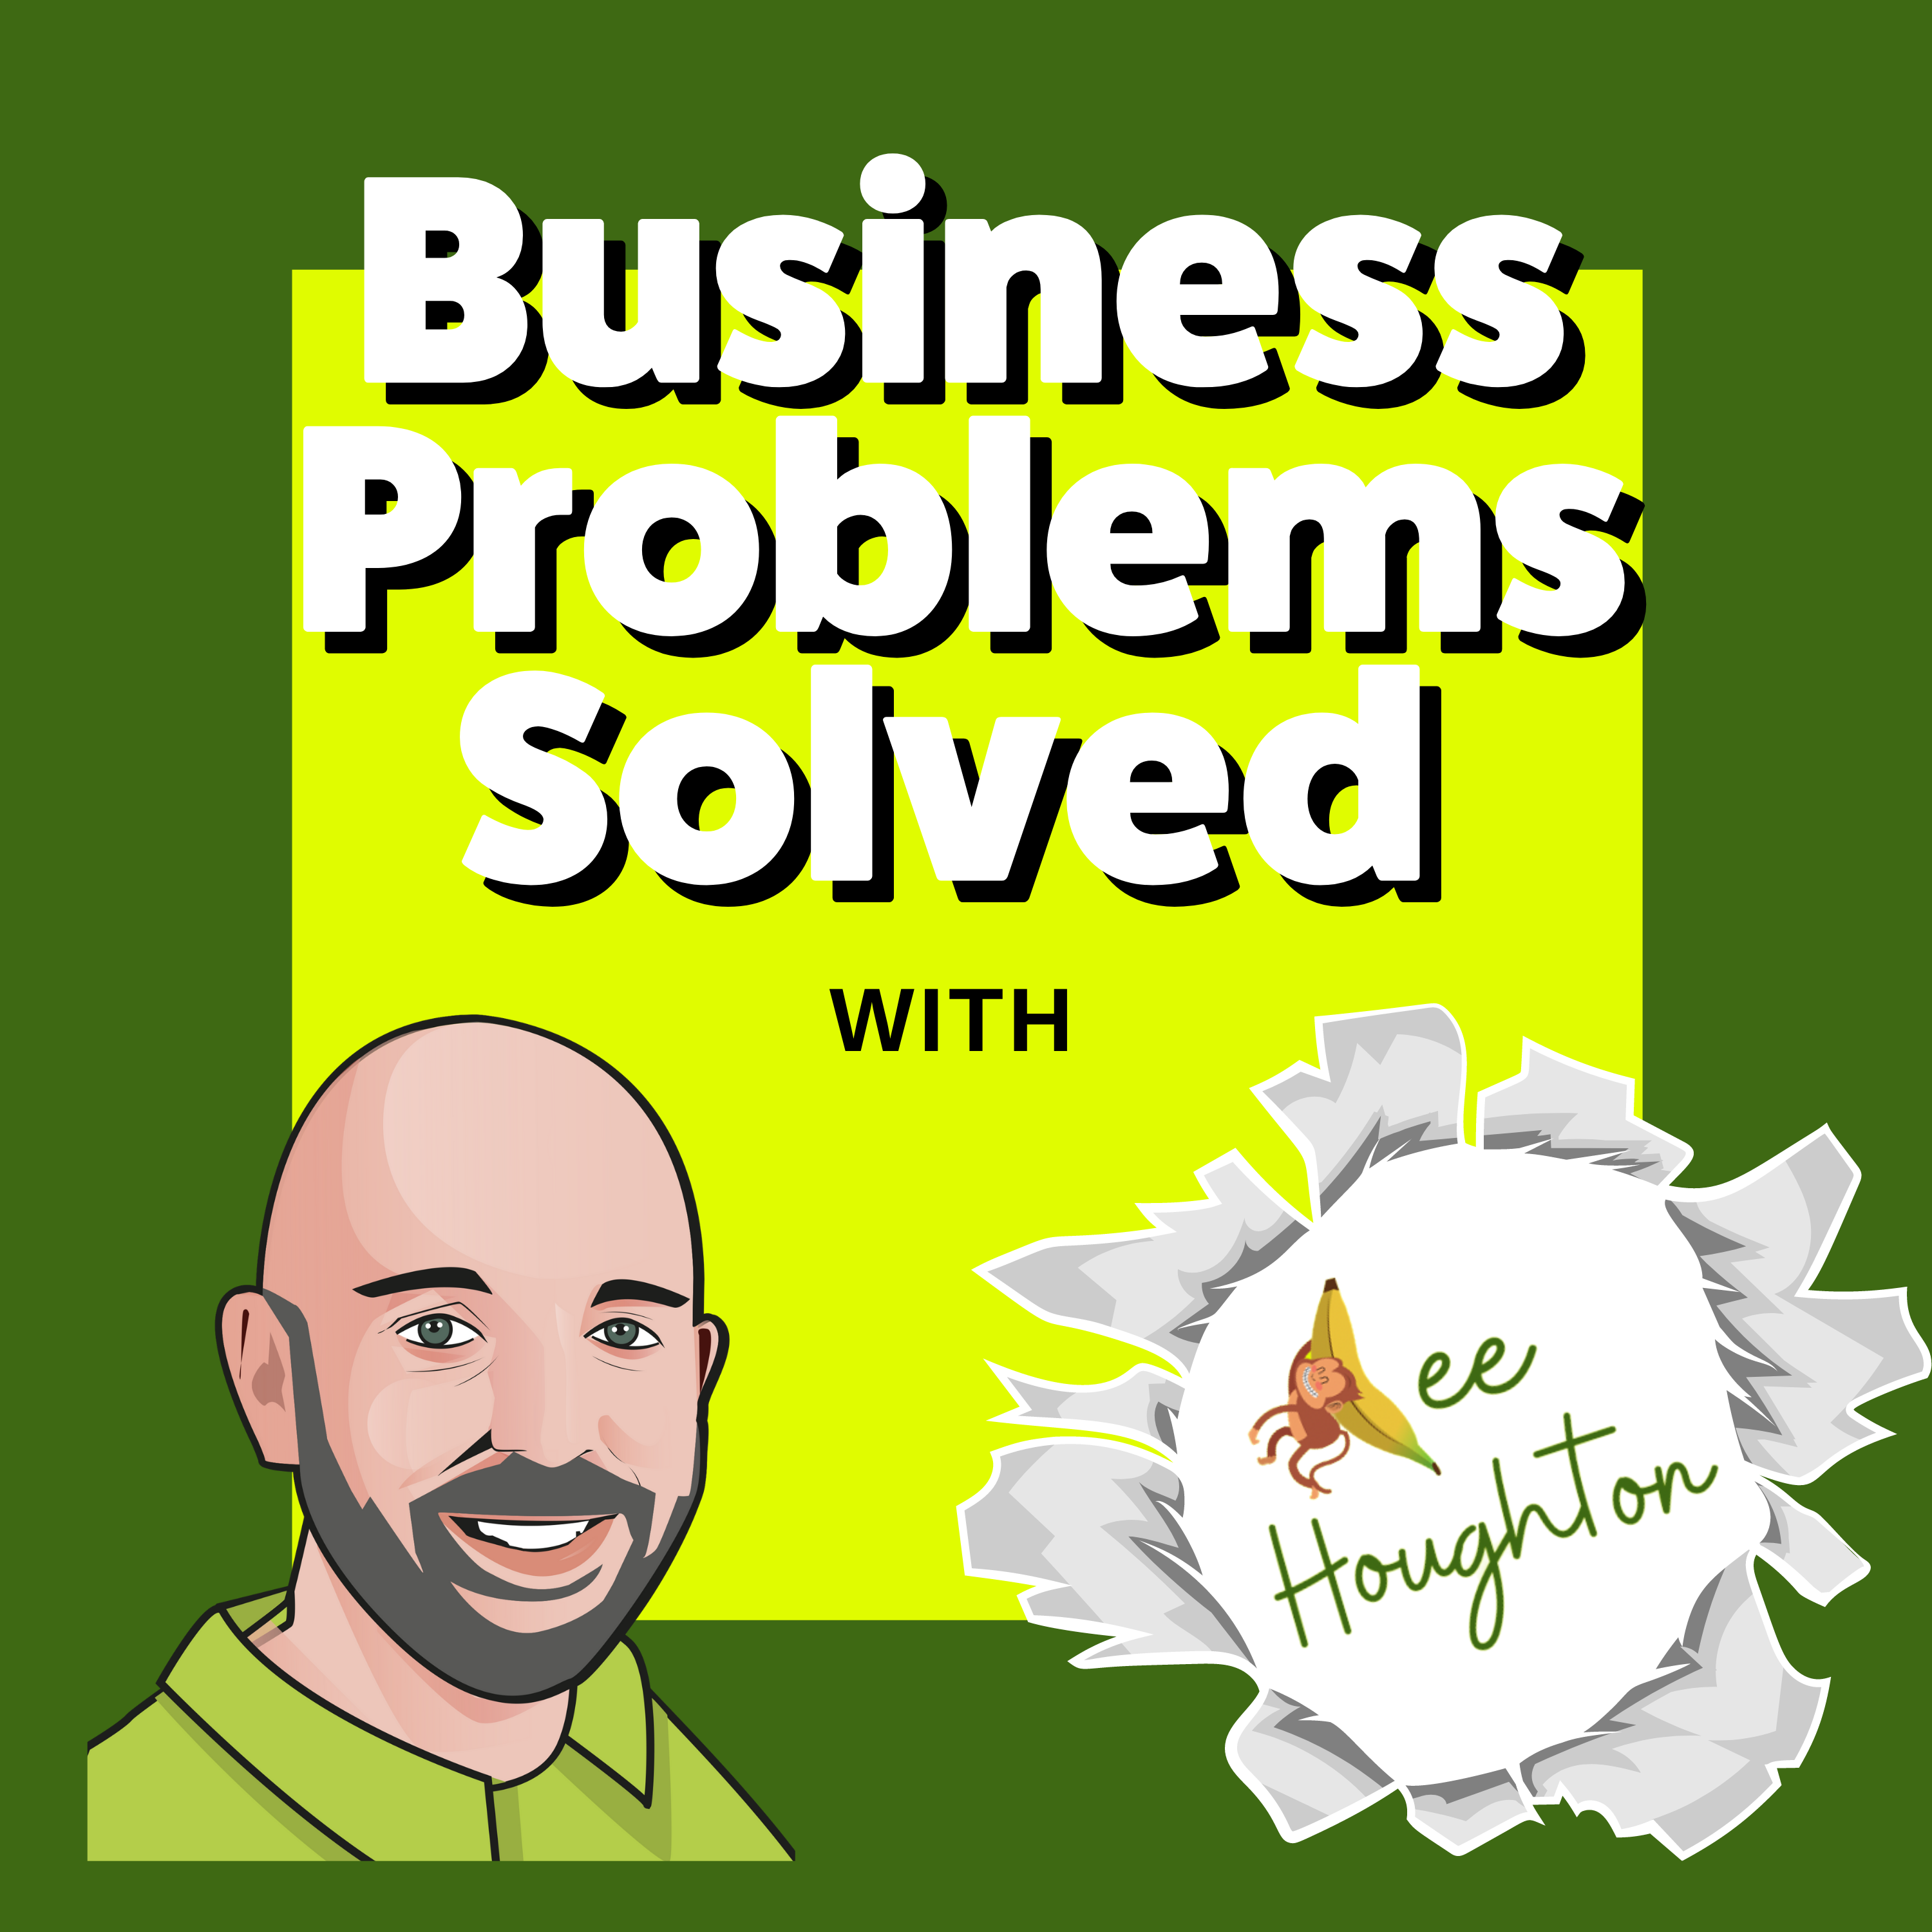 An introduction to THE Business Problem Solver – Lee Houghton